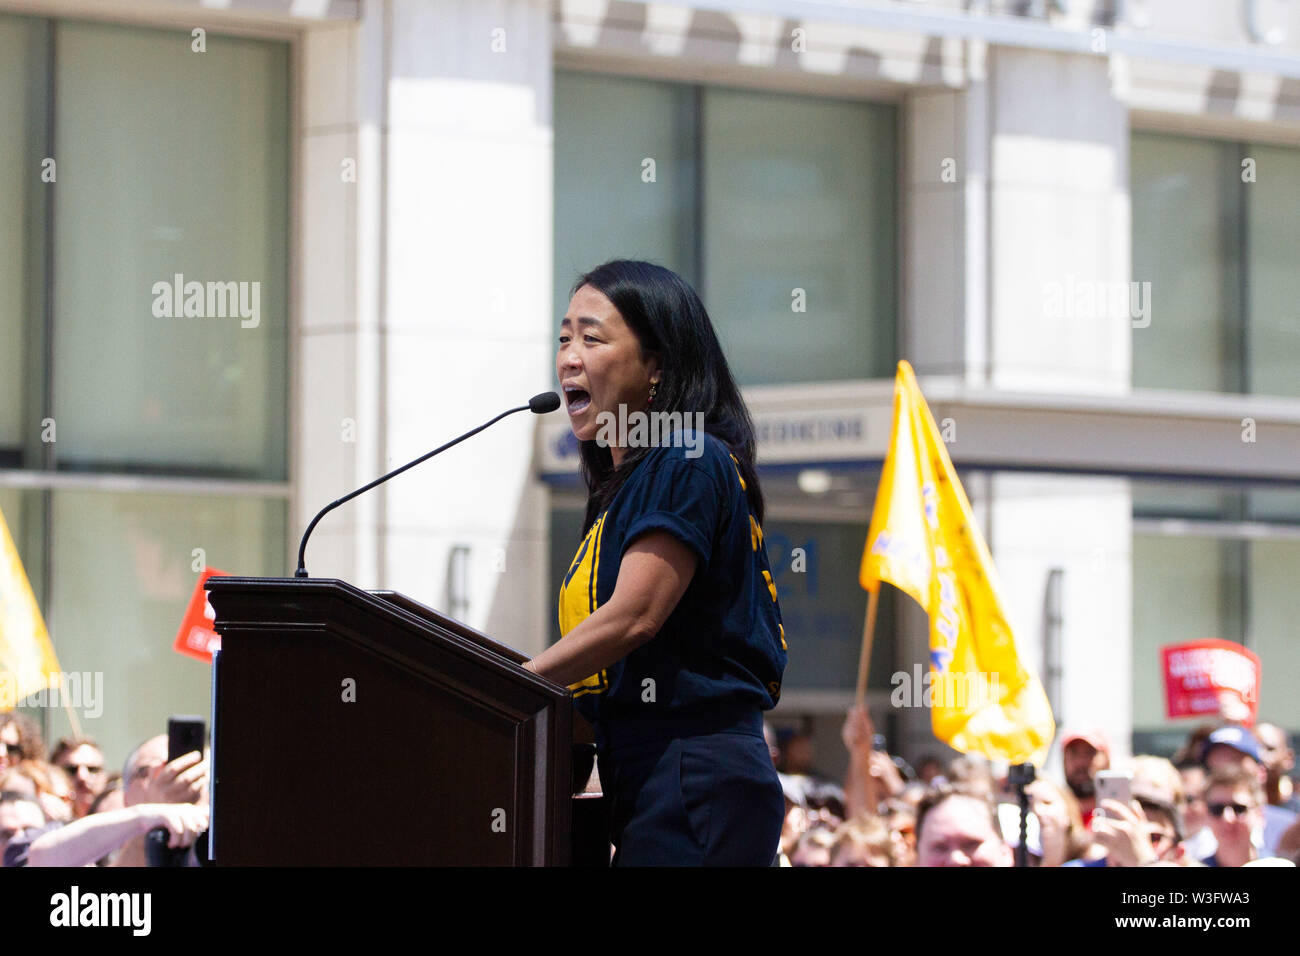 Philadelphia, Pennsylvania, USA. 15th July, 2019. Philadelphia Councilwoman Helen Gym addresses the crowd at a rally gathered to protest the closure of Hahnemann University Hospital, July 15, 2019. Hahnemann, a busy urban healthcare center, is facing imminent closure after being acquired by a hedge fund that is looking to raze the building and turn the land into rental or retail properties. 15th July, 2019. Credit: Michael Candelori/ZUMA Wire/Alamy Live News Credit: ZUMA Press, Inc./Alamy Live News Stock Photo